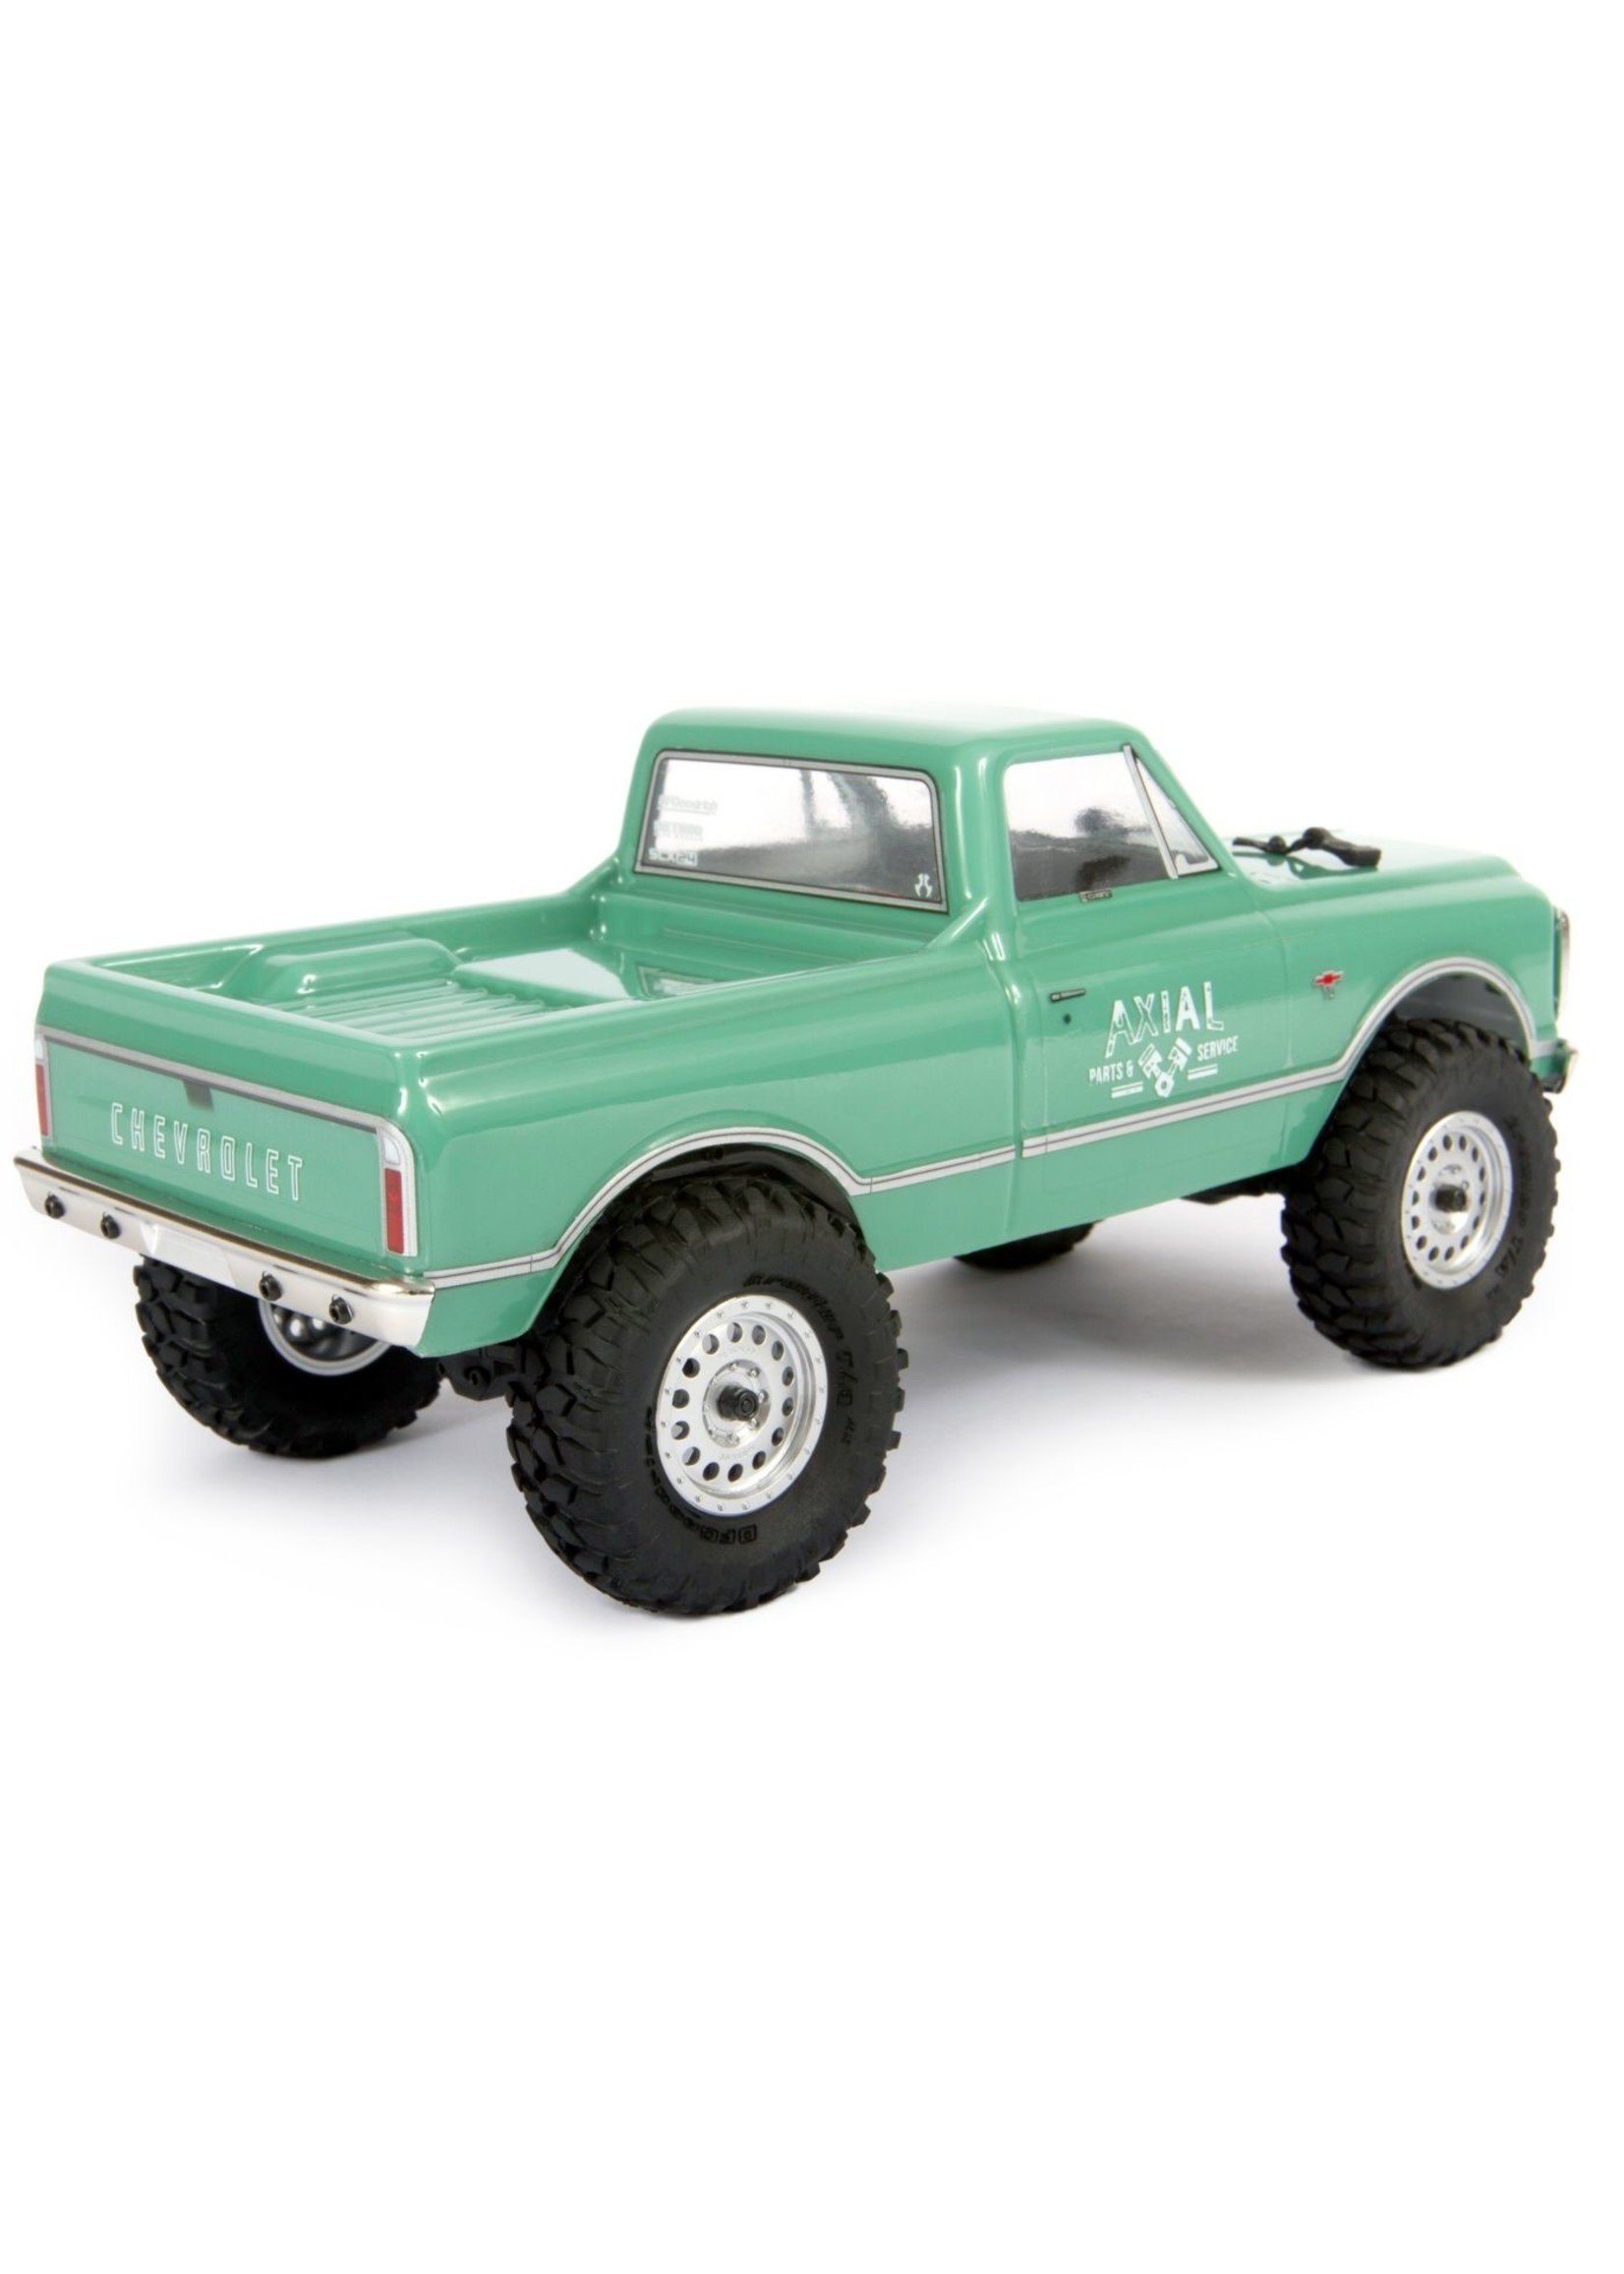 Axial 1/24 SCX24 1967 Chevrolet C10 4WD Truck Brushed RTR - Light Green